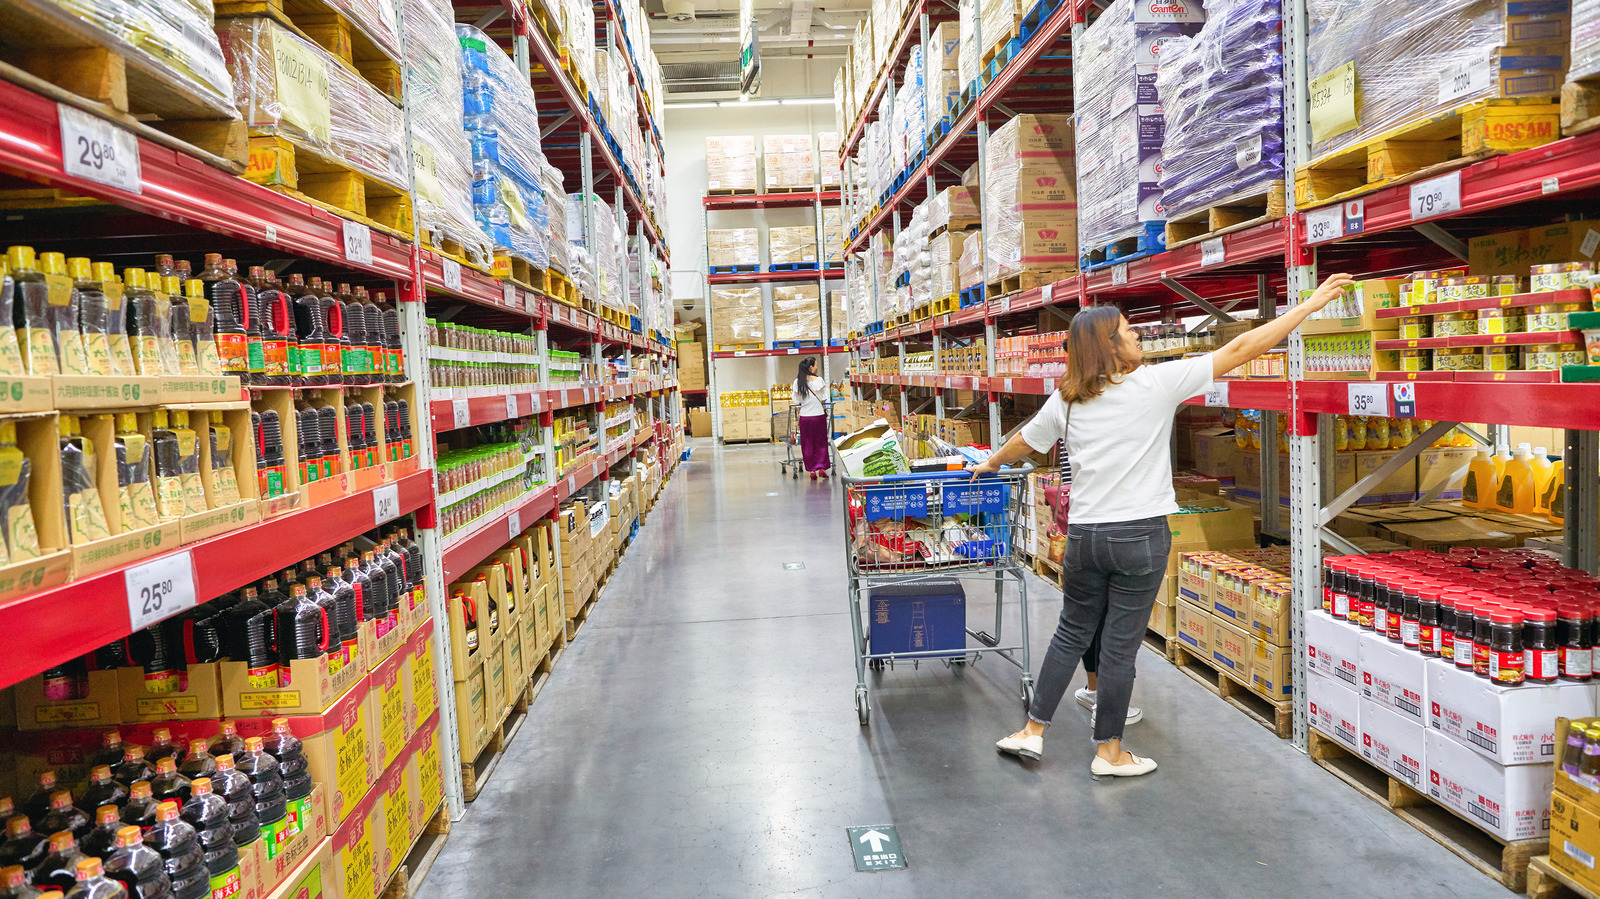 15 Foods And Drinks You Might Want To Avoid Buying At Sam’s Club